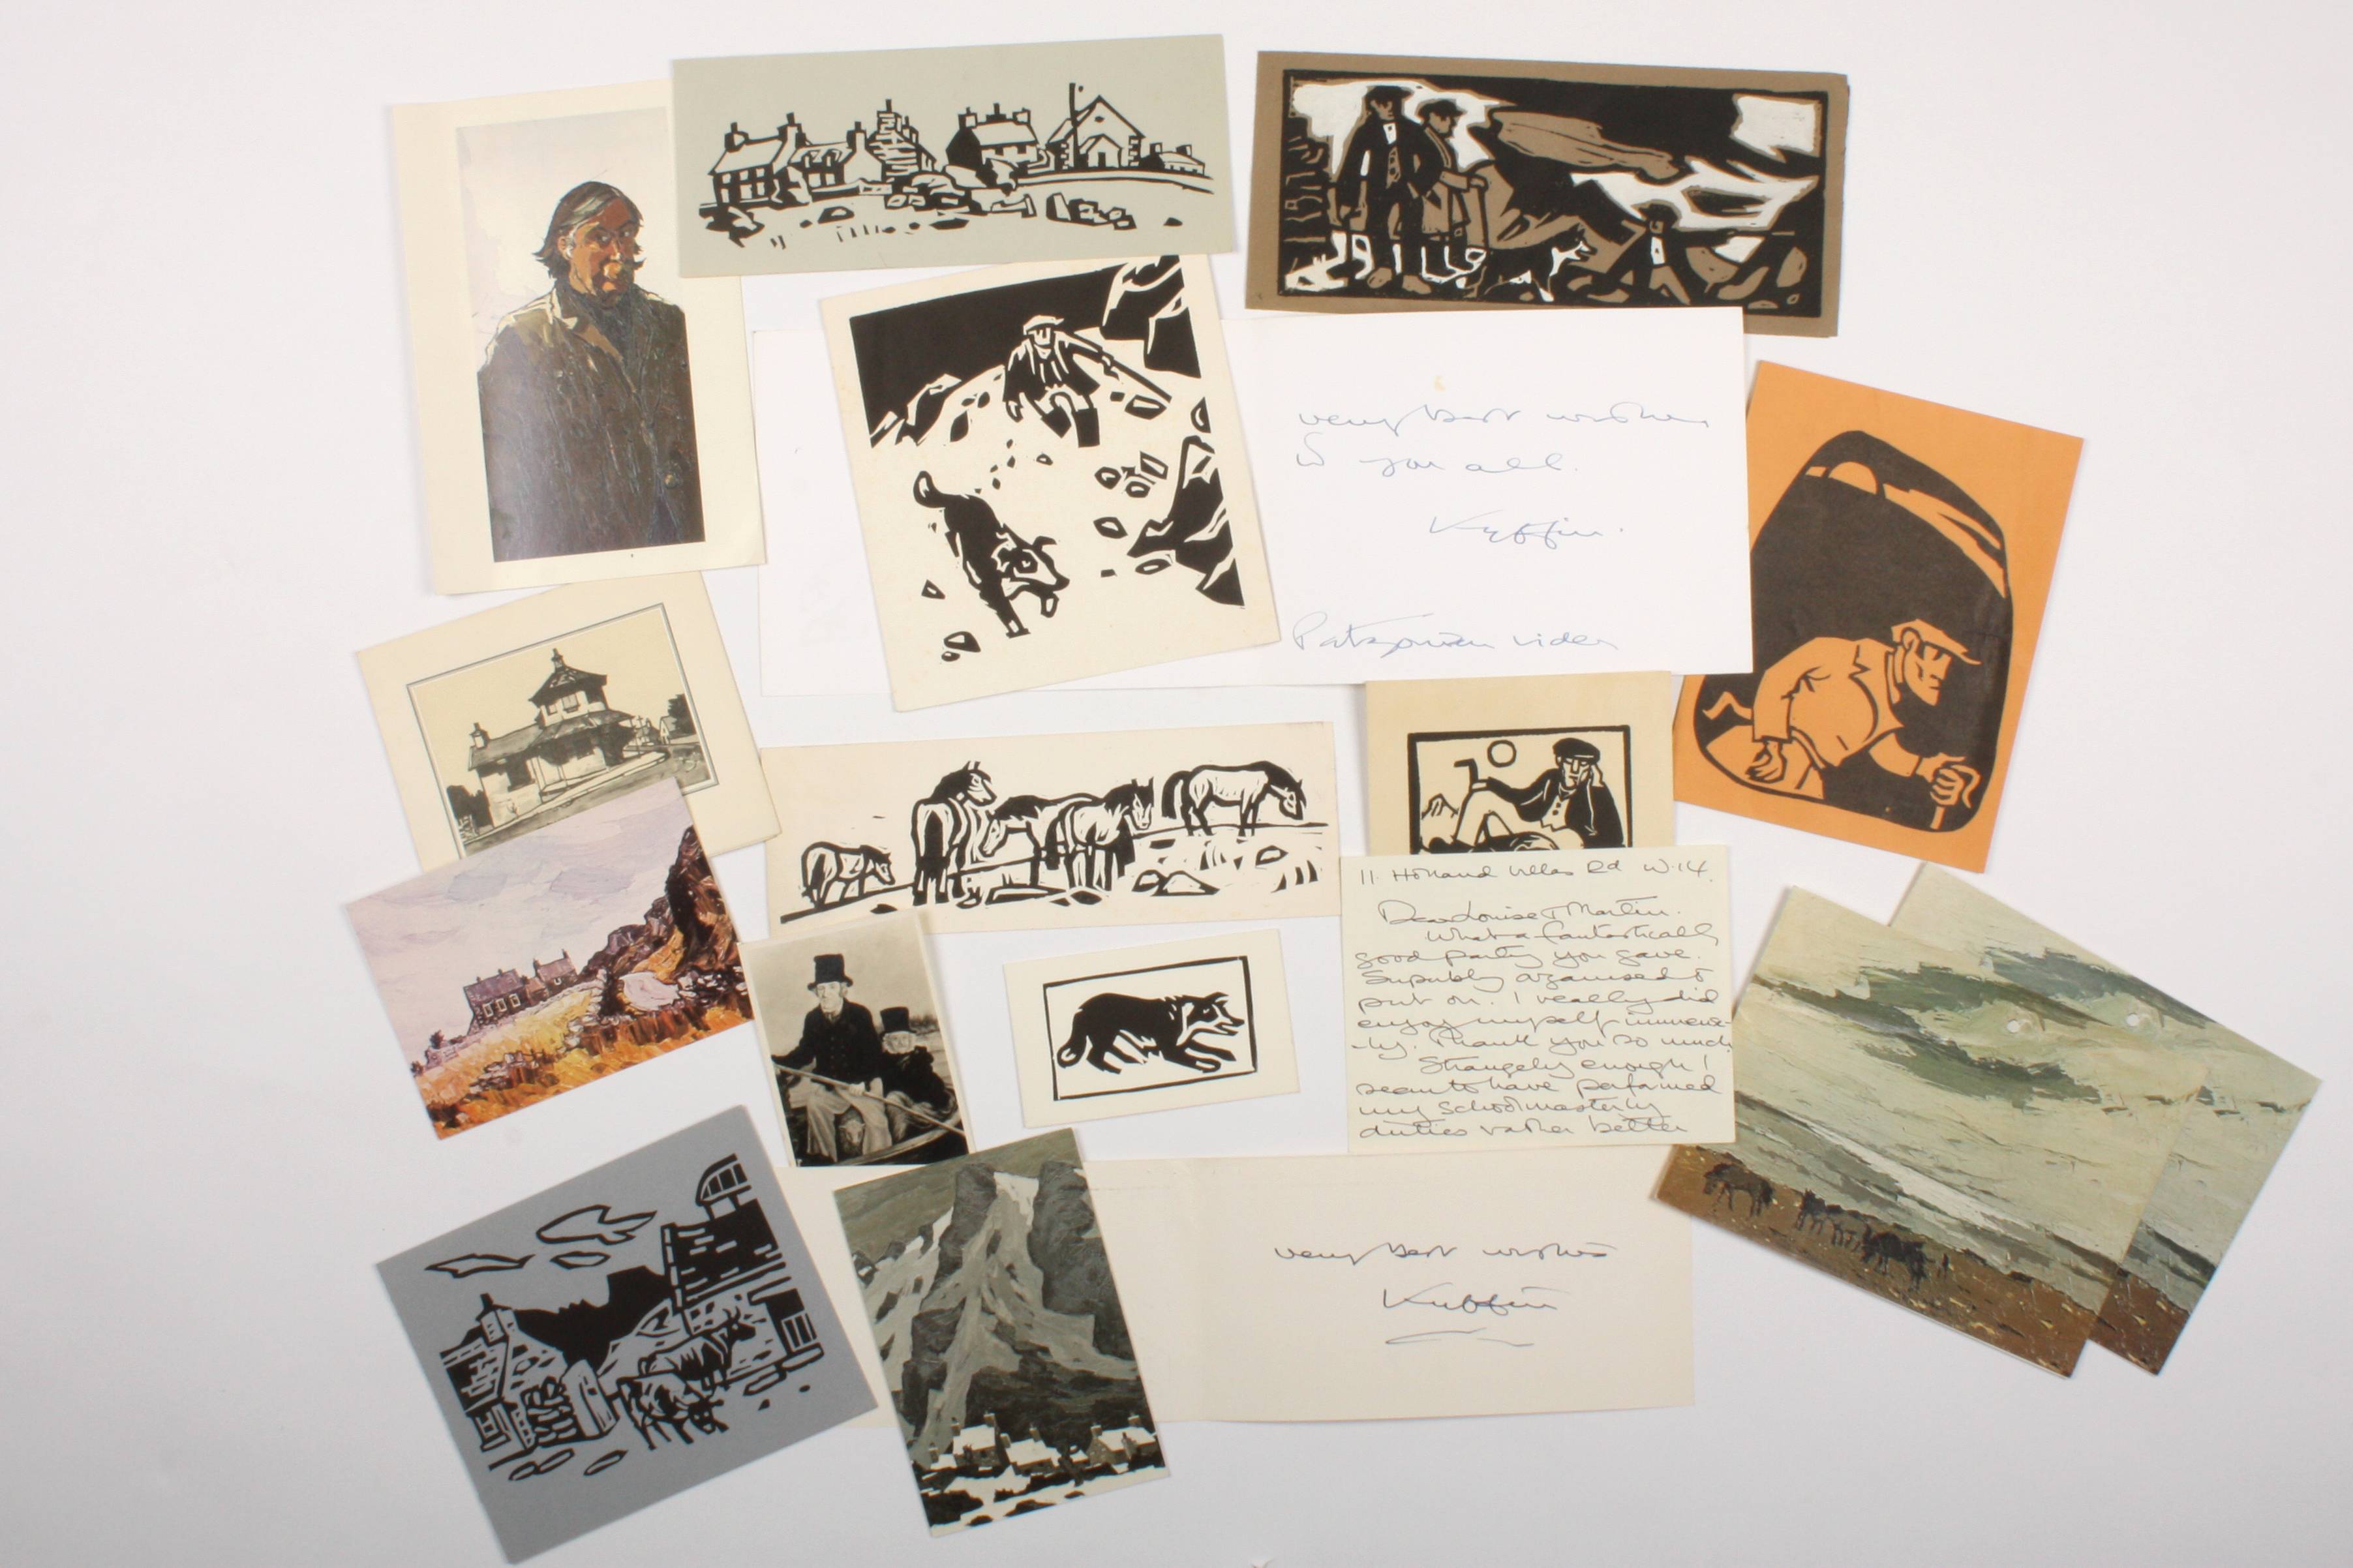 A collection of Kyffin Williams greetings cards signed by artist
each of the ten cards signed